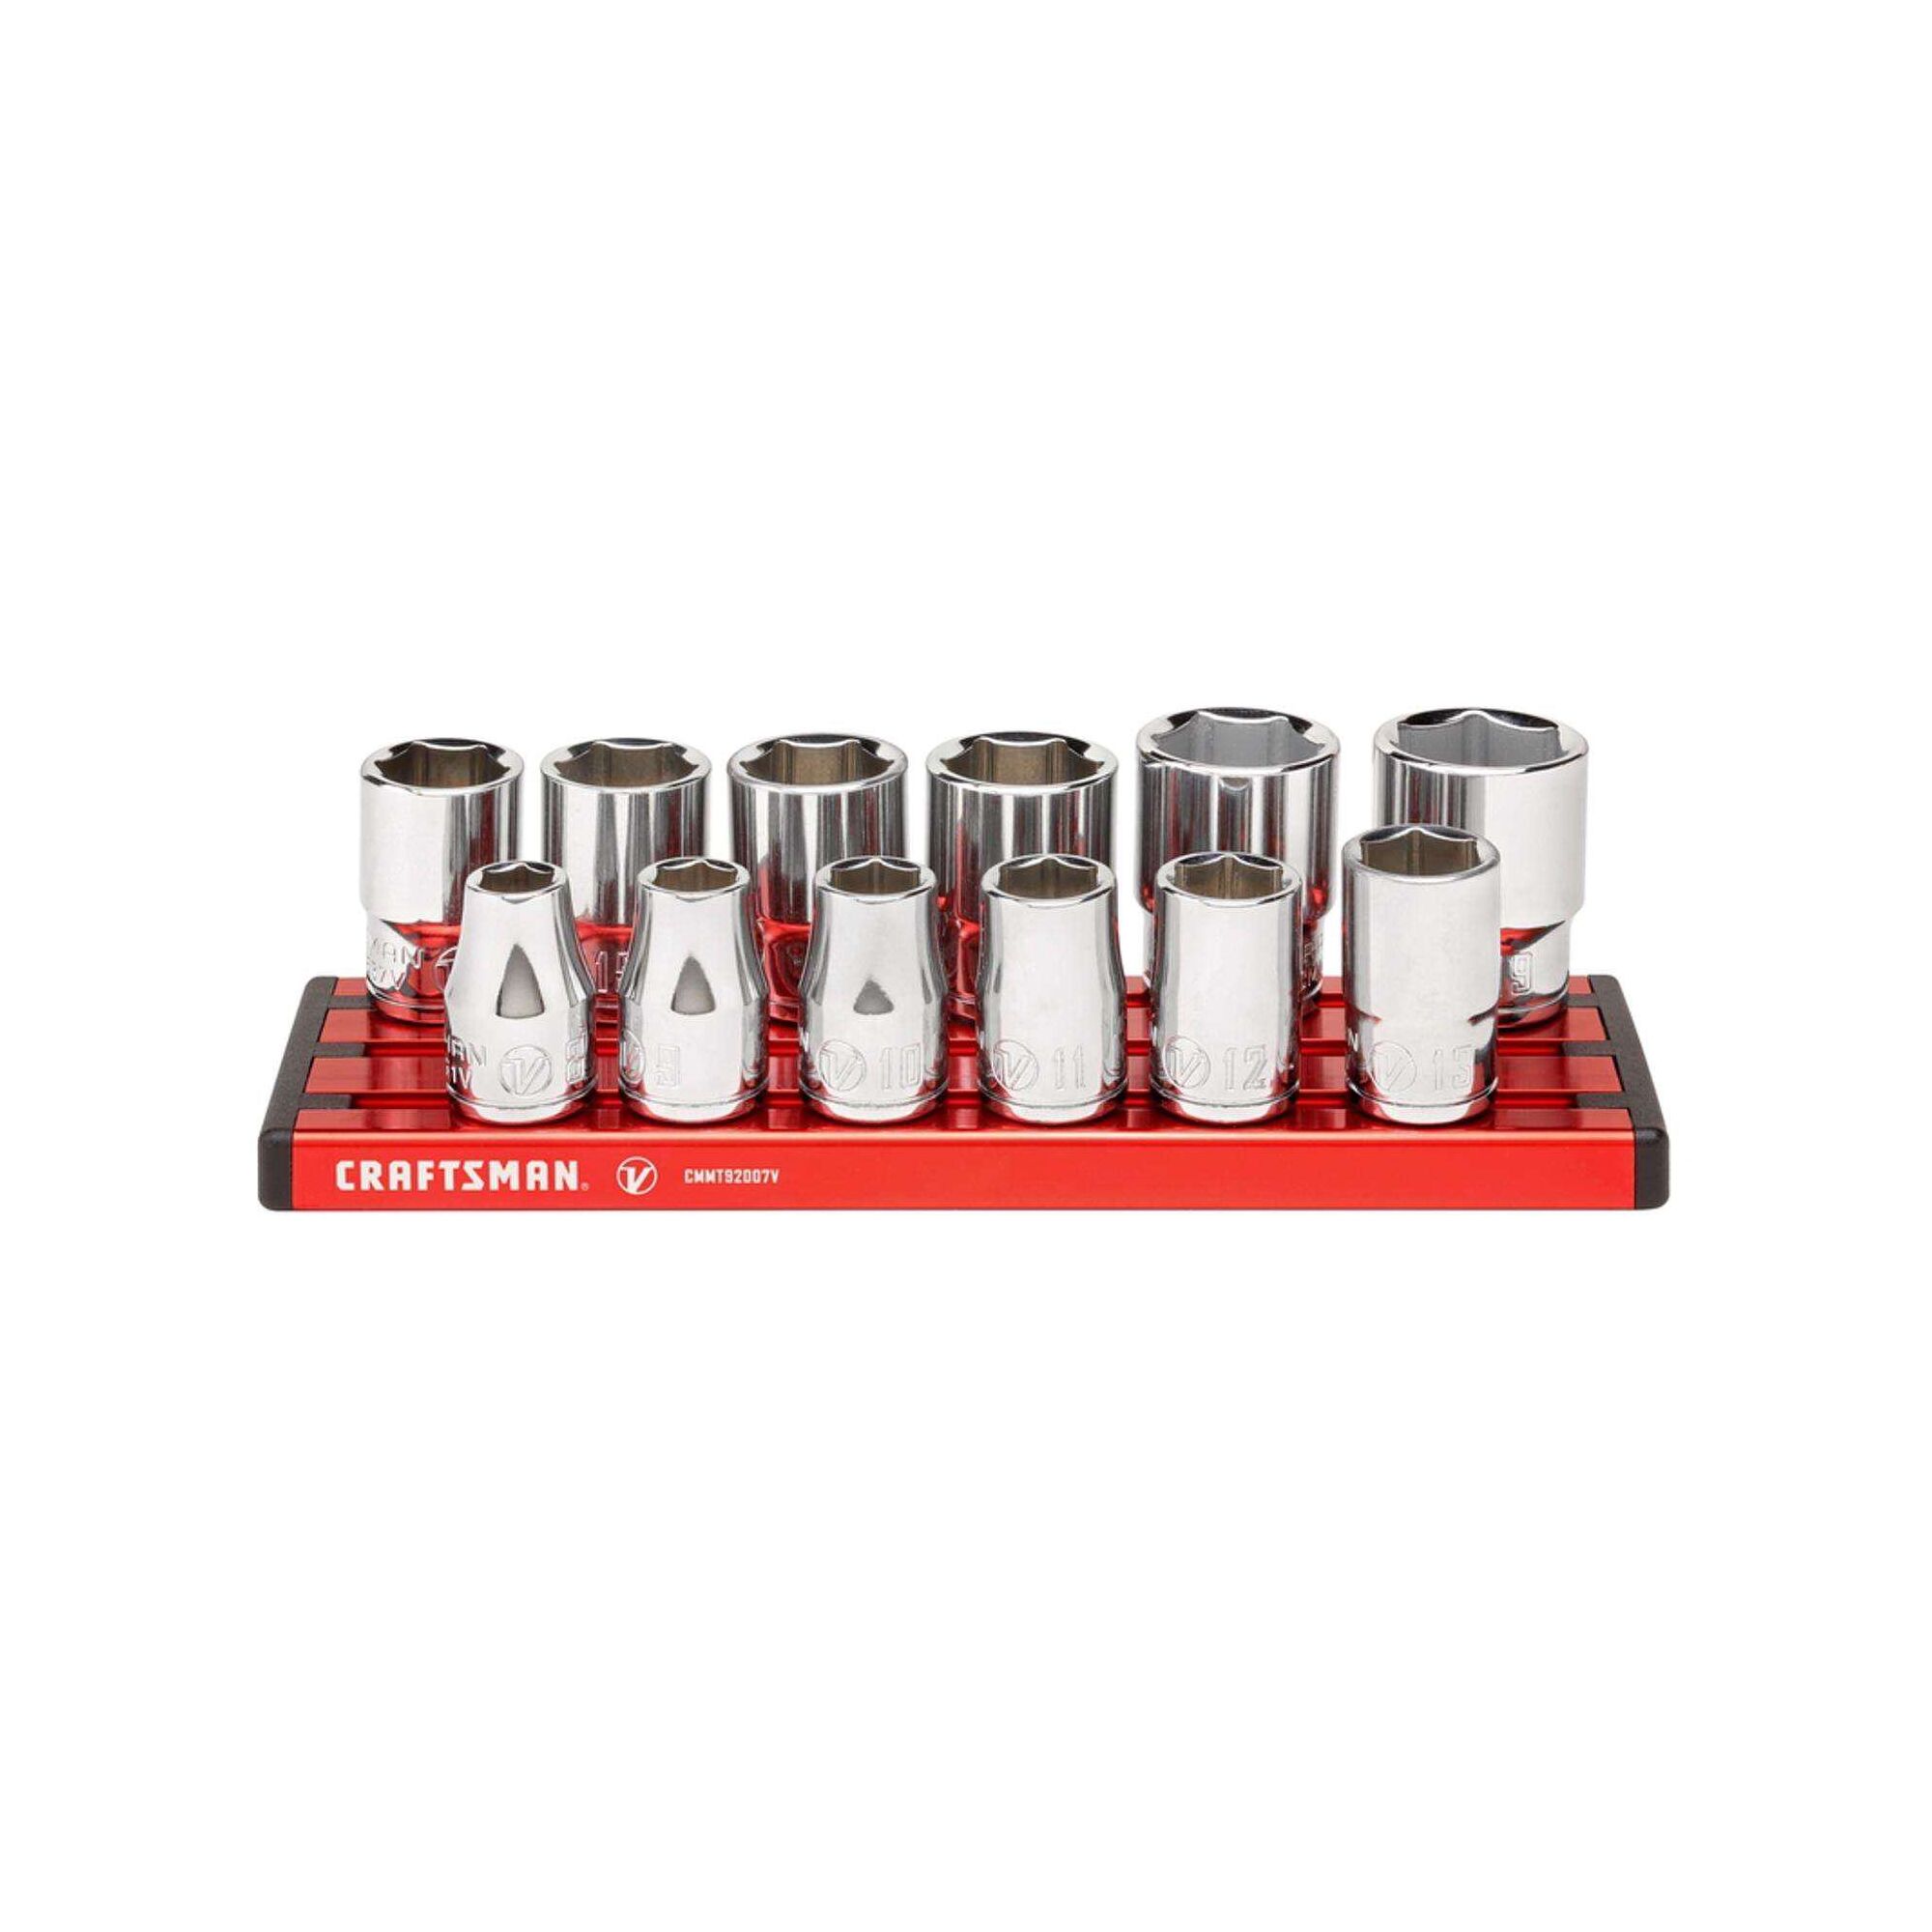 View of CRAFTSMAN Sockets: 6-Point and additional tools in the kit